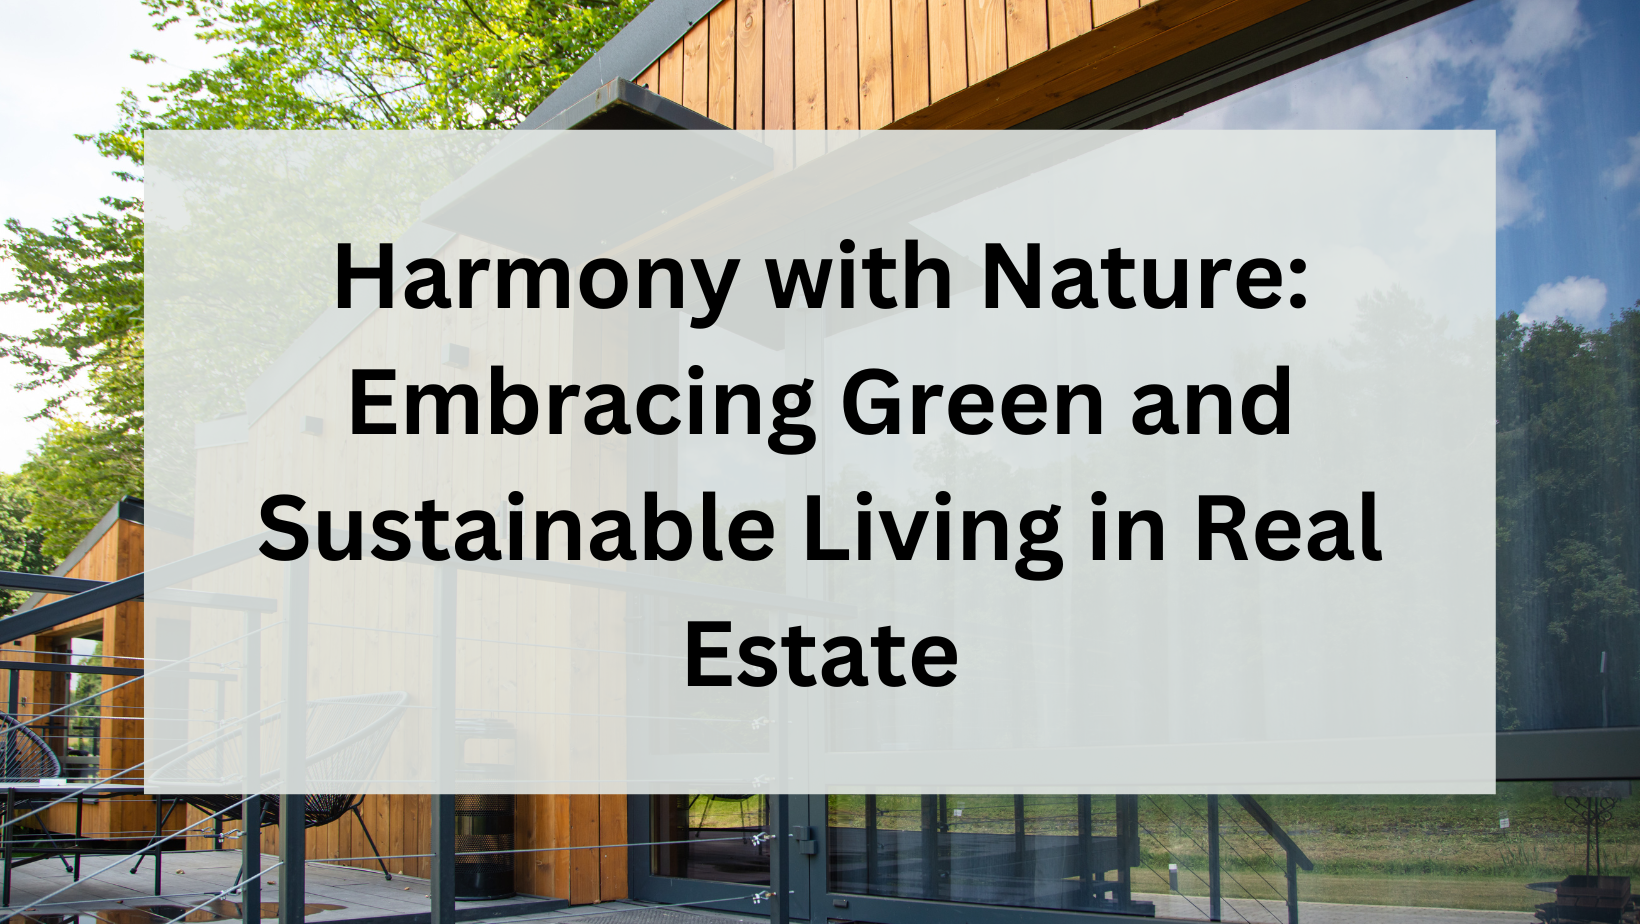 Harmony with Nature: Embracing Green and Sustainable Living in Real Estate